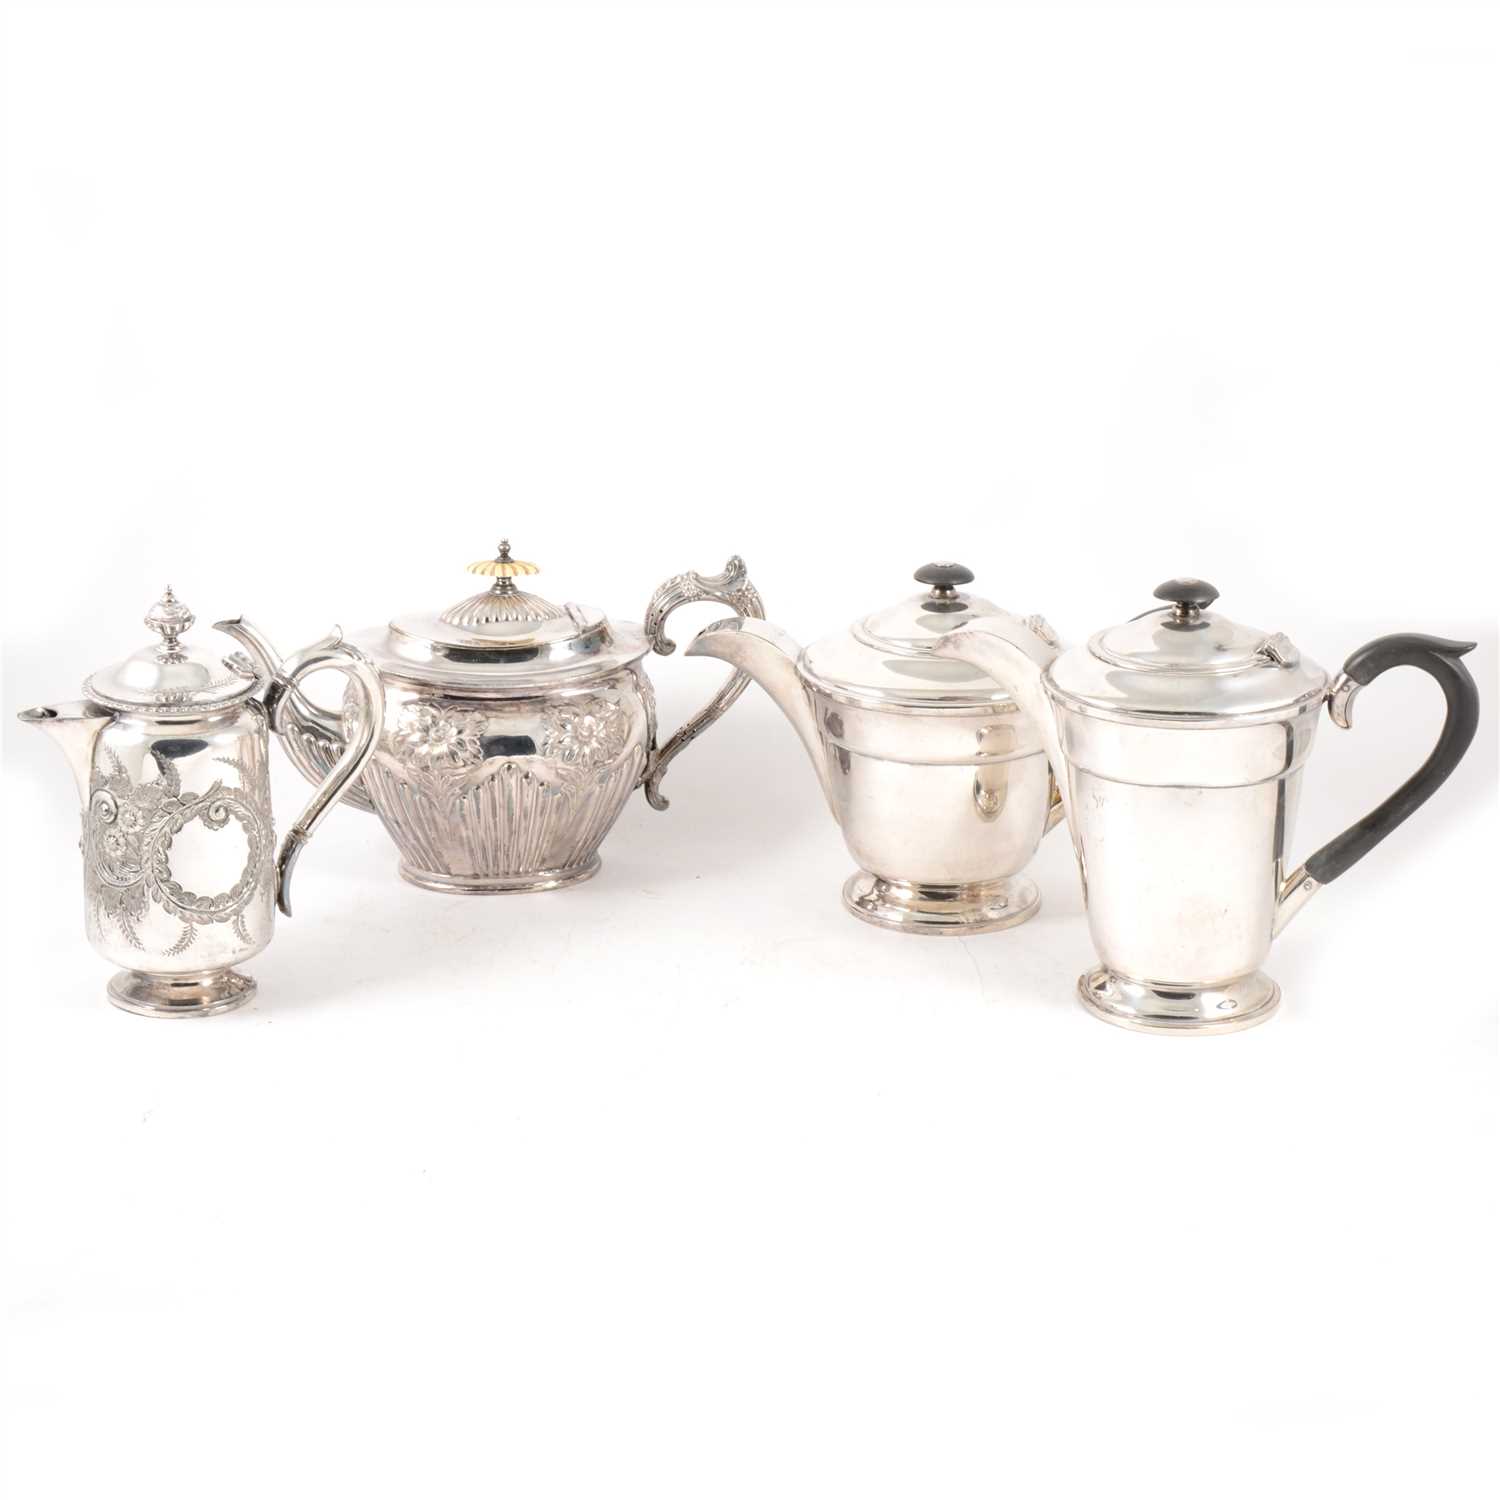 Lot 96 - A silver-plated tea and coffee pots by Walker & Hall in the art deco style